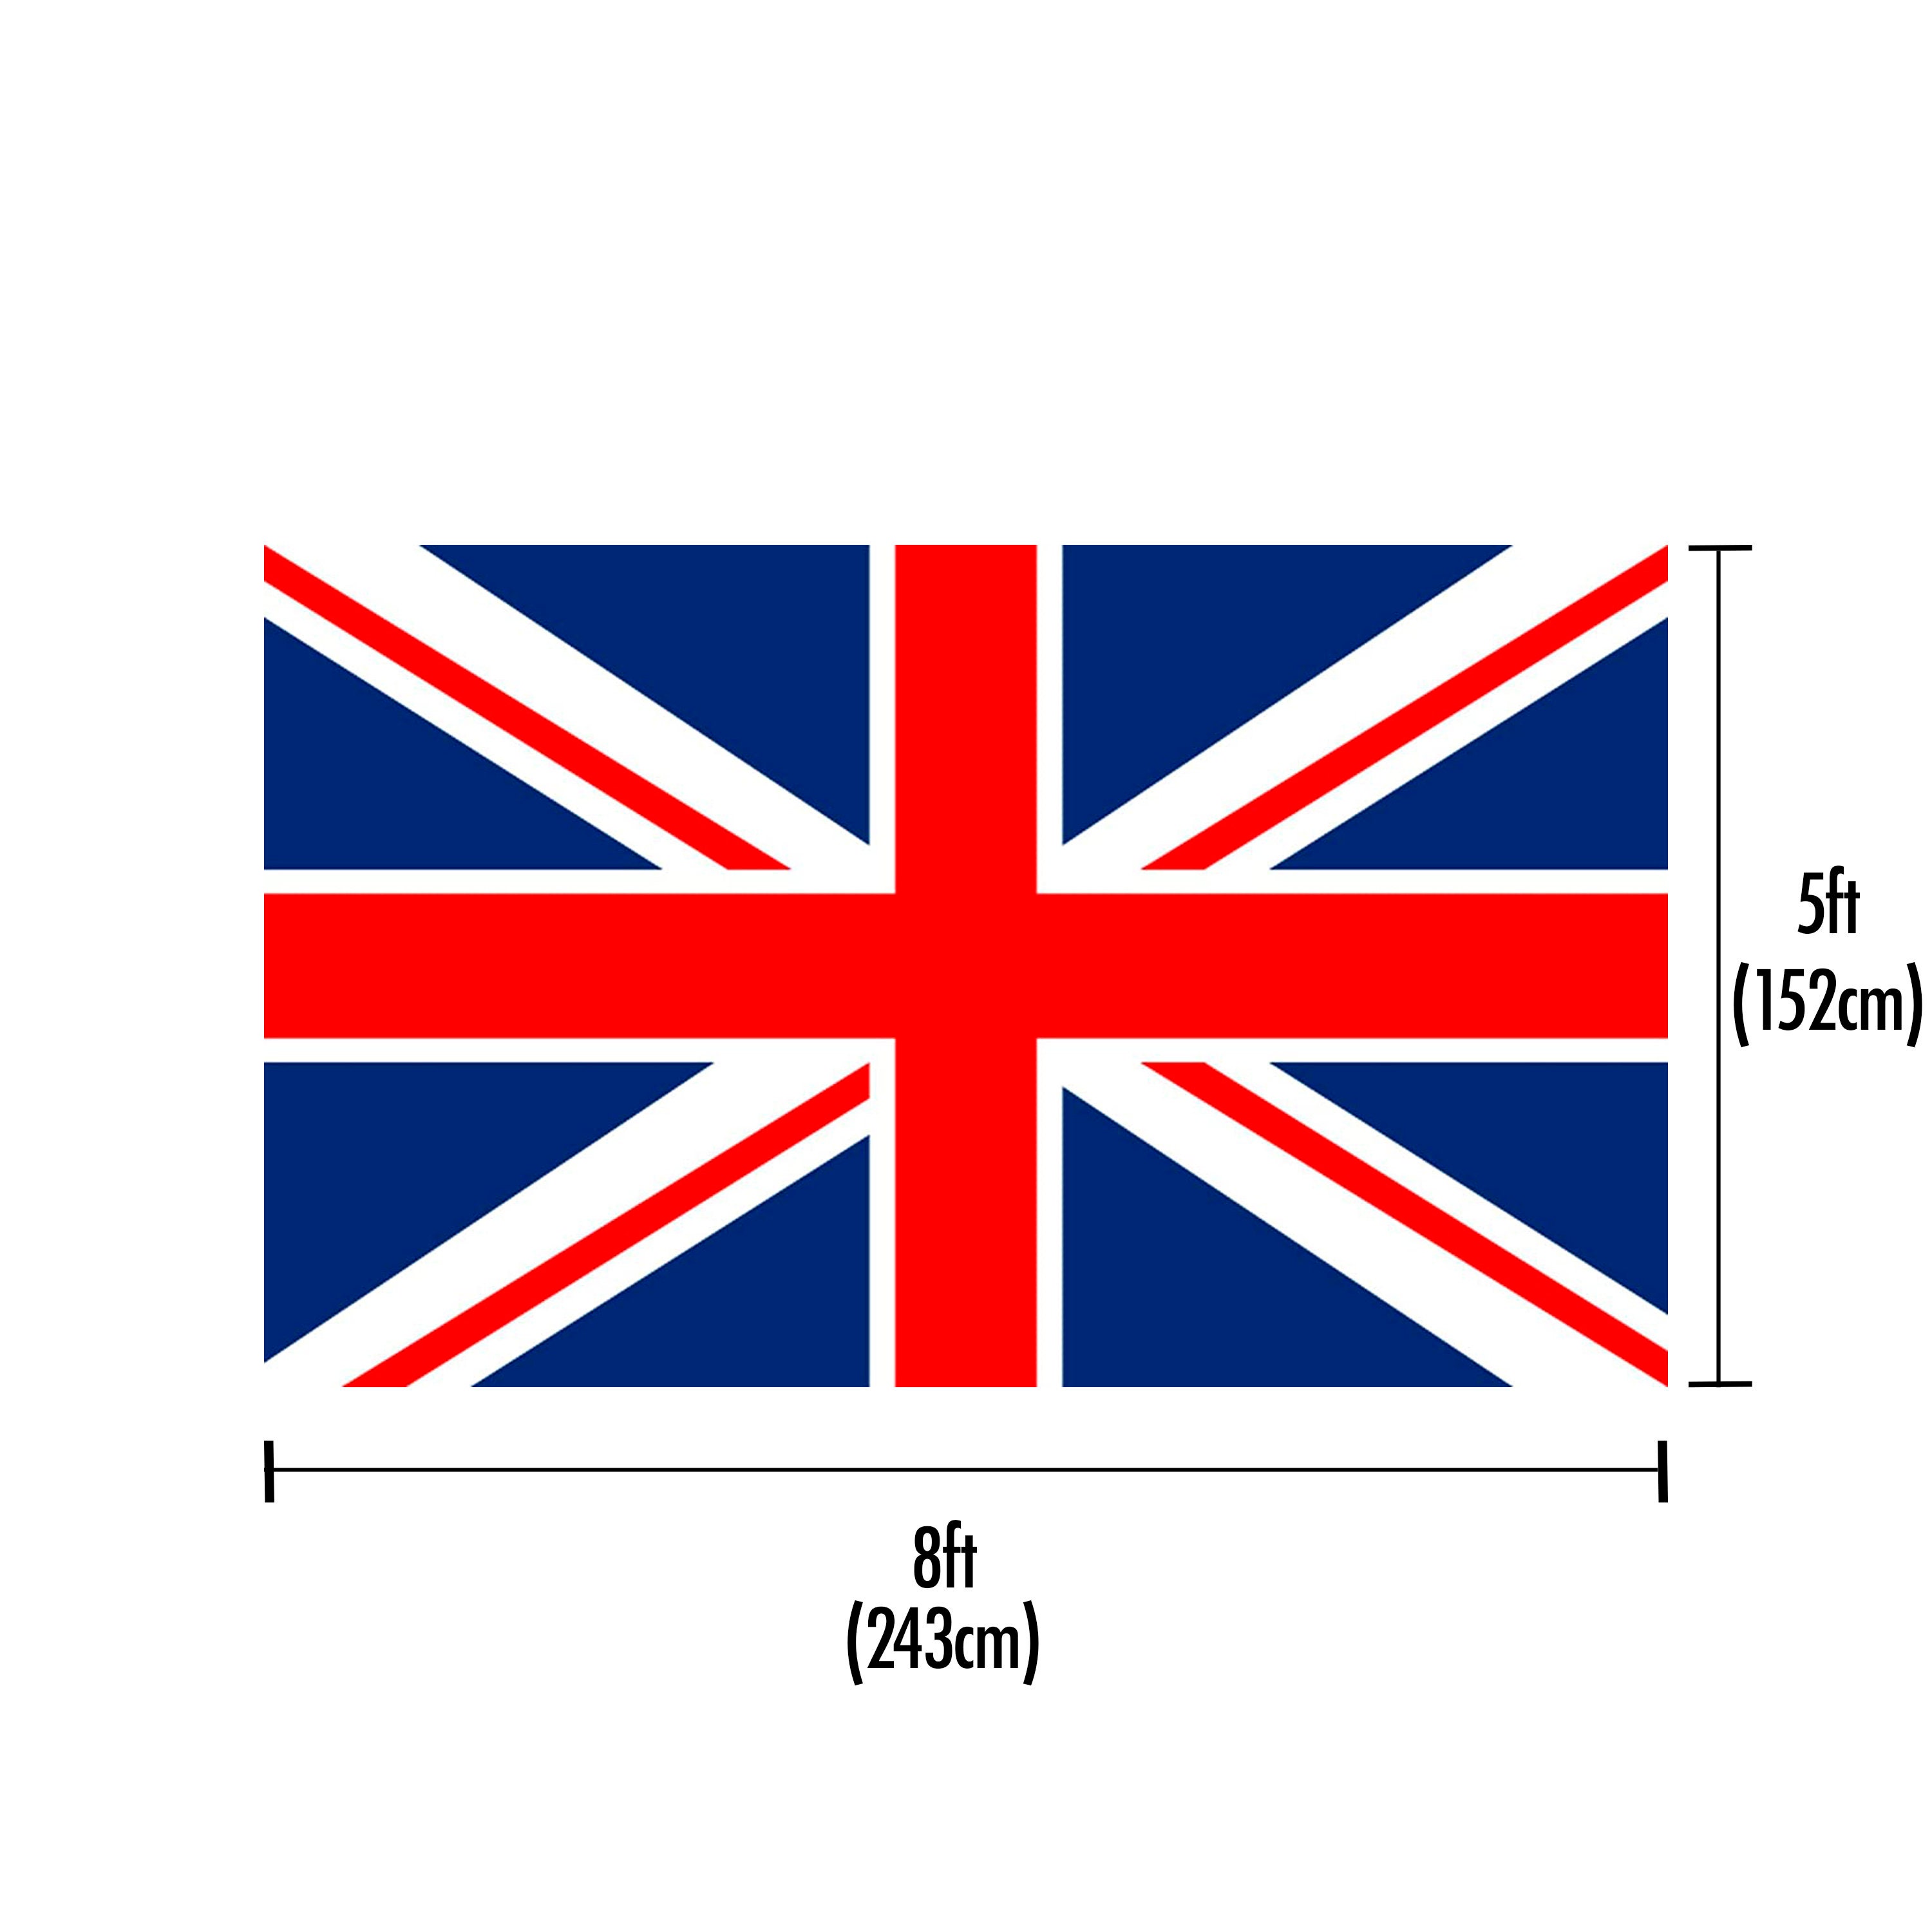 Giant 8ft X 5ft Union Jack Flag Jubilee Great Britain 240cm X